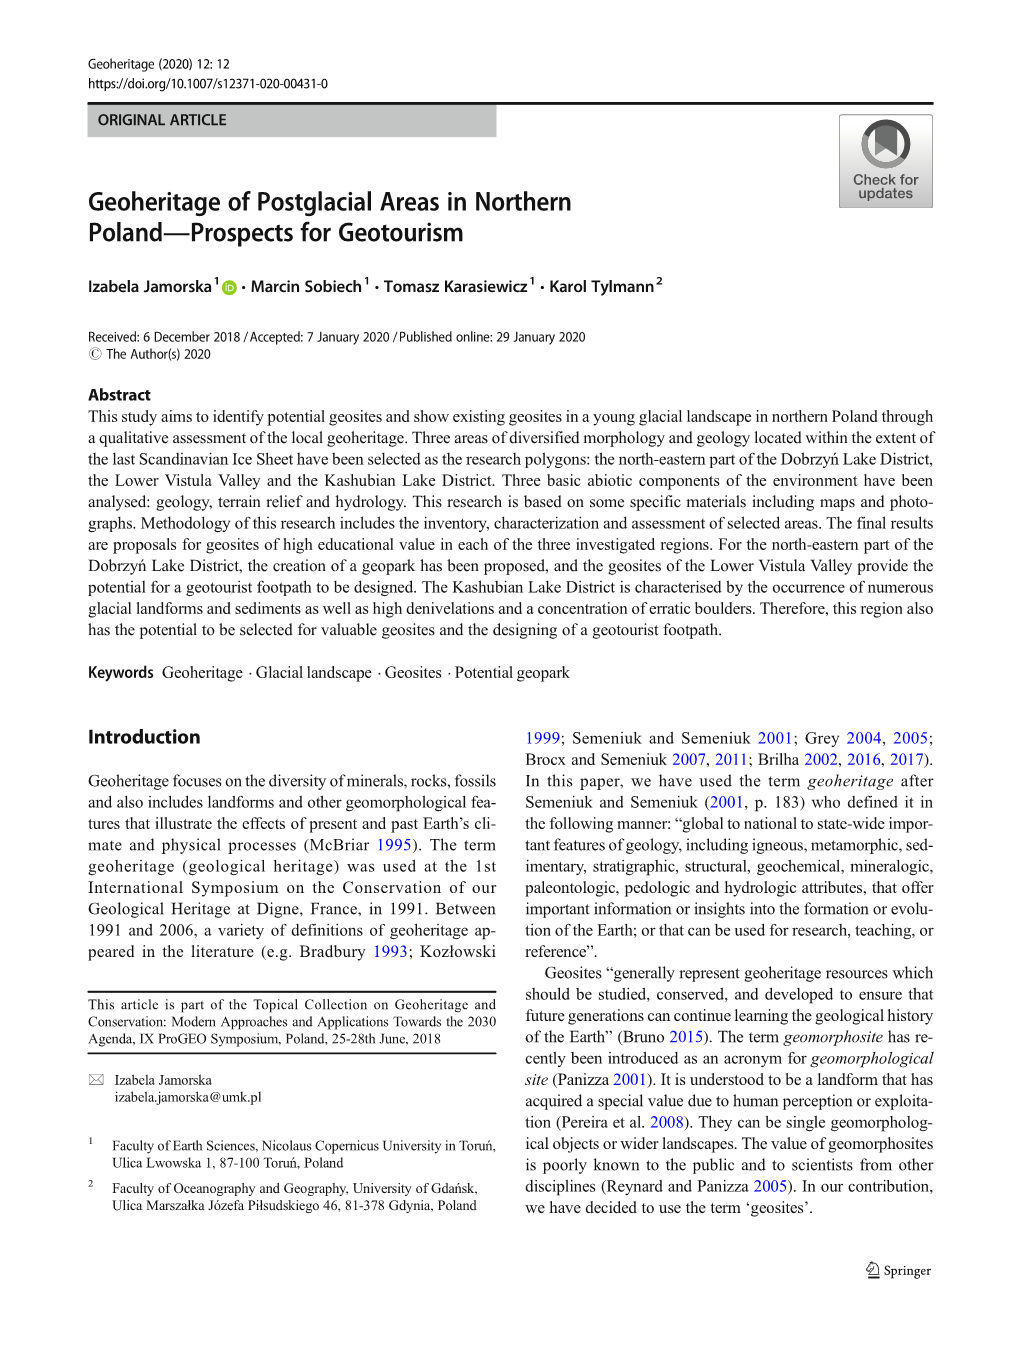 Geoheritage of Postglacial Areas in Northern Poland—Prospects for Geotourism